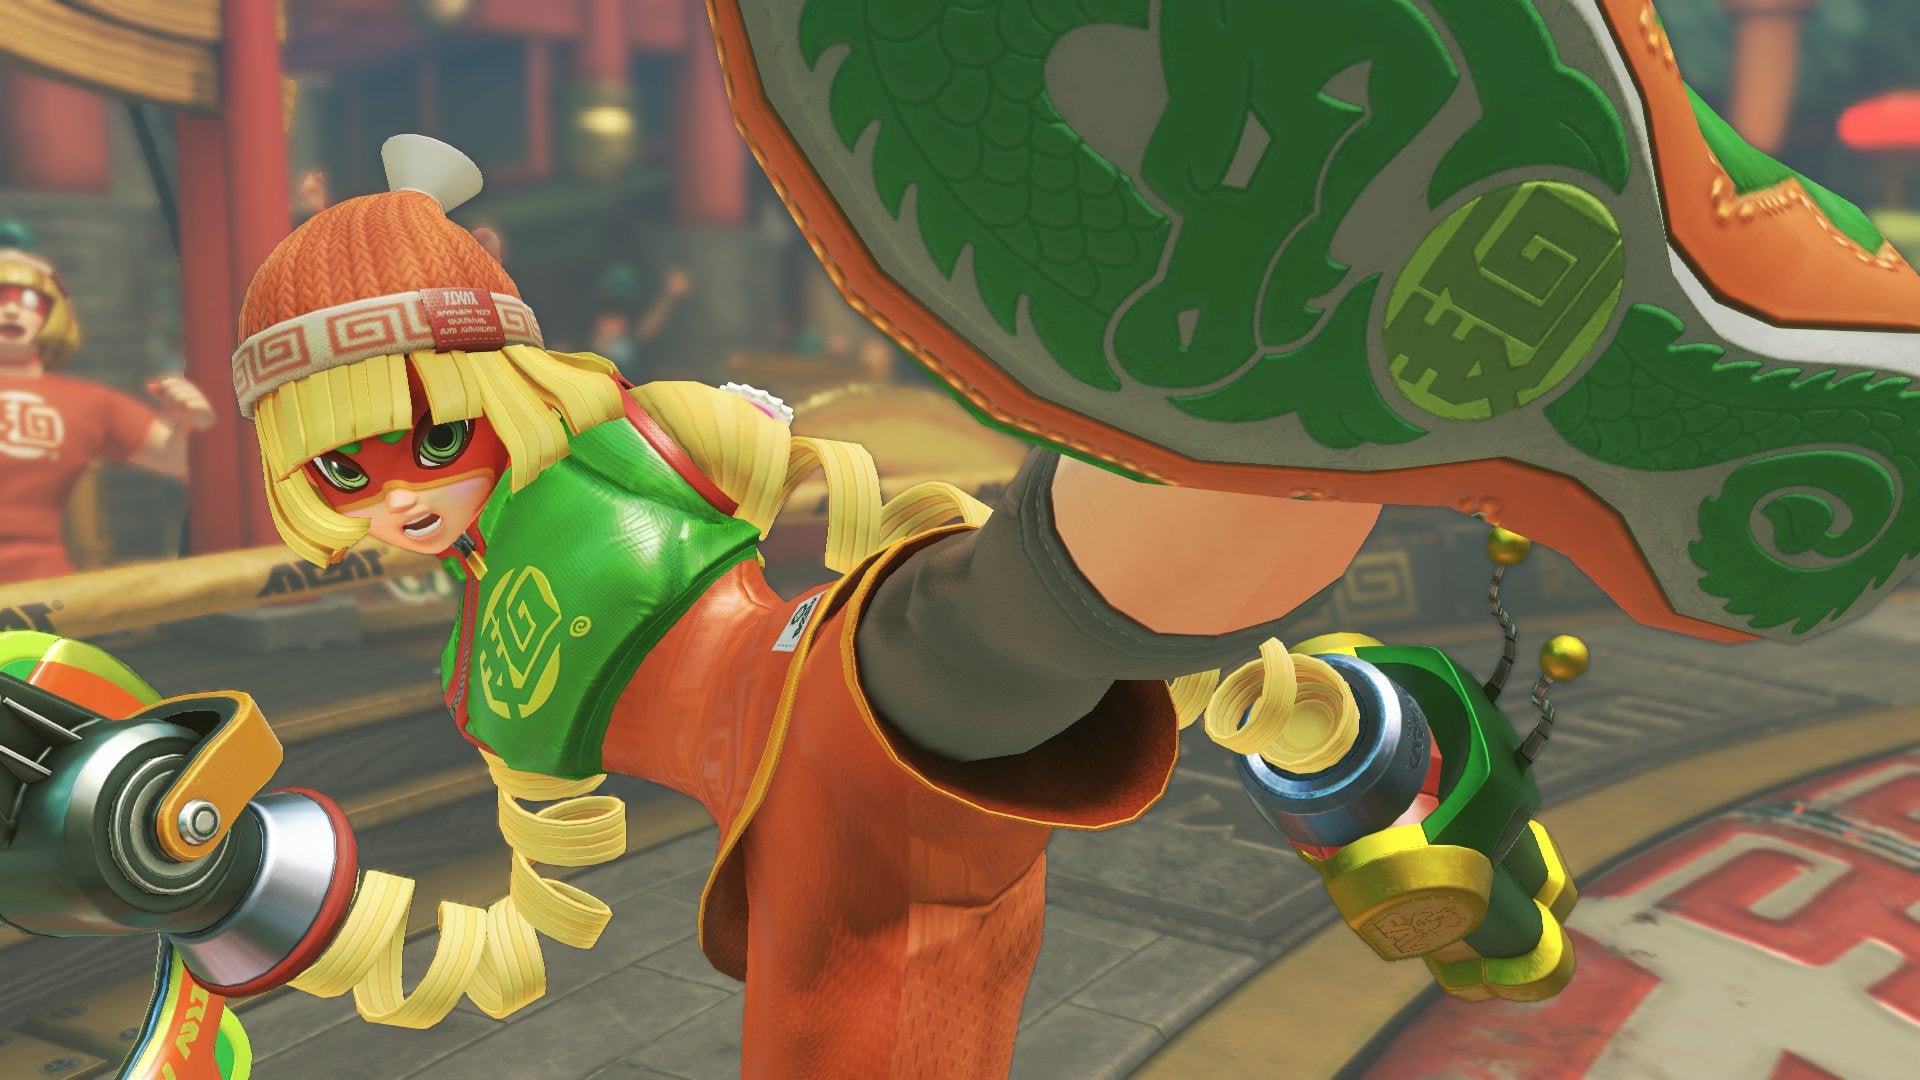 Image for Arms first week sales in Japan rivals Tekken 7's and Street Fighter 5's, selling over 100k units